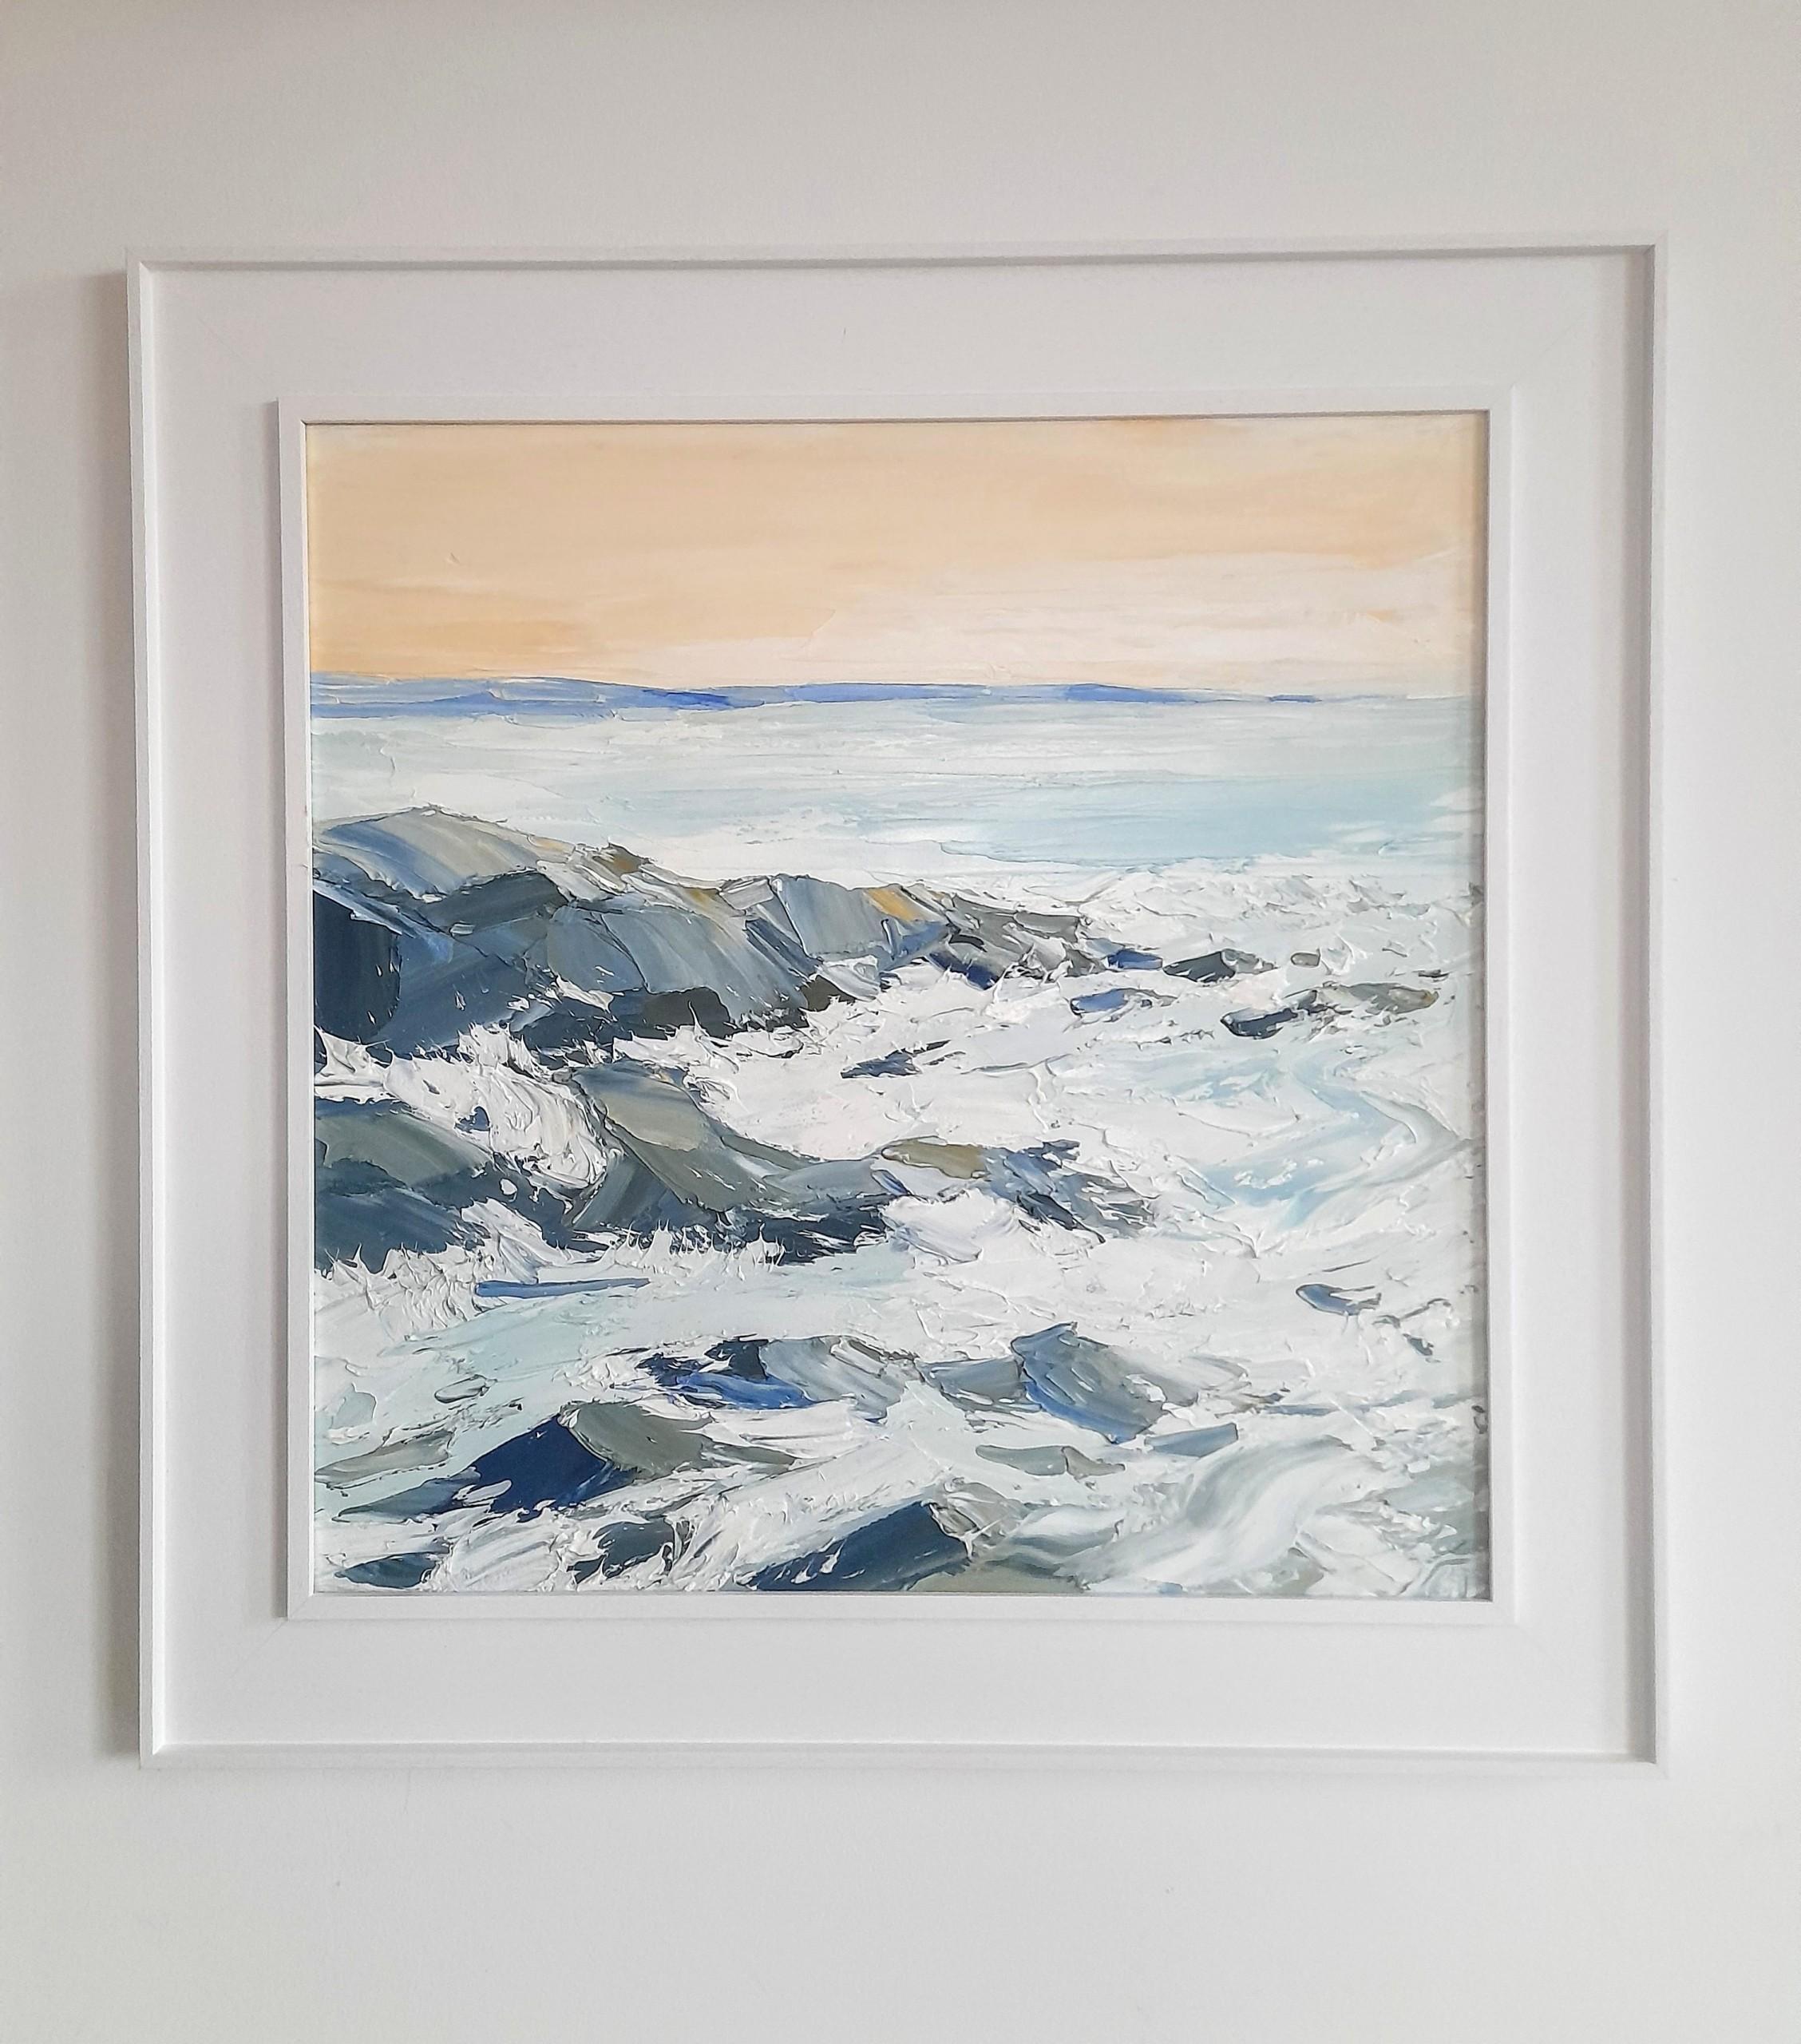 Incoming tide at the breakwater by Georgie Dowling is an original oil painting portraying the scene of the incoming tide crashing over the rocks at the breakwater in Bude, Cornwall. The scene portrays an evening on the coast with a warm sky and